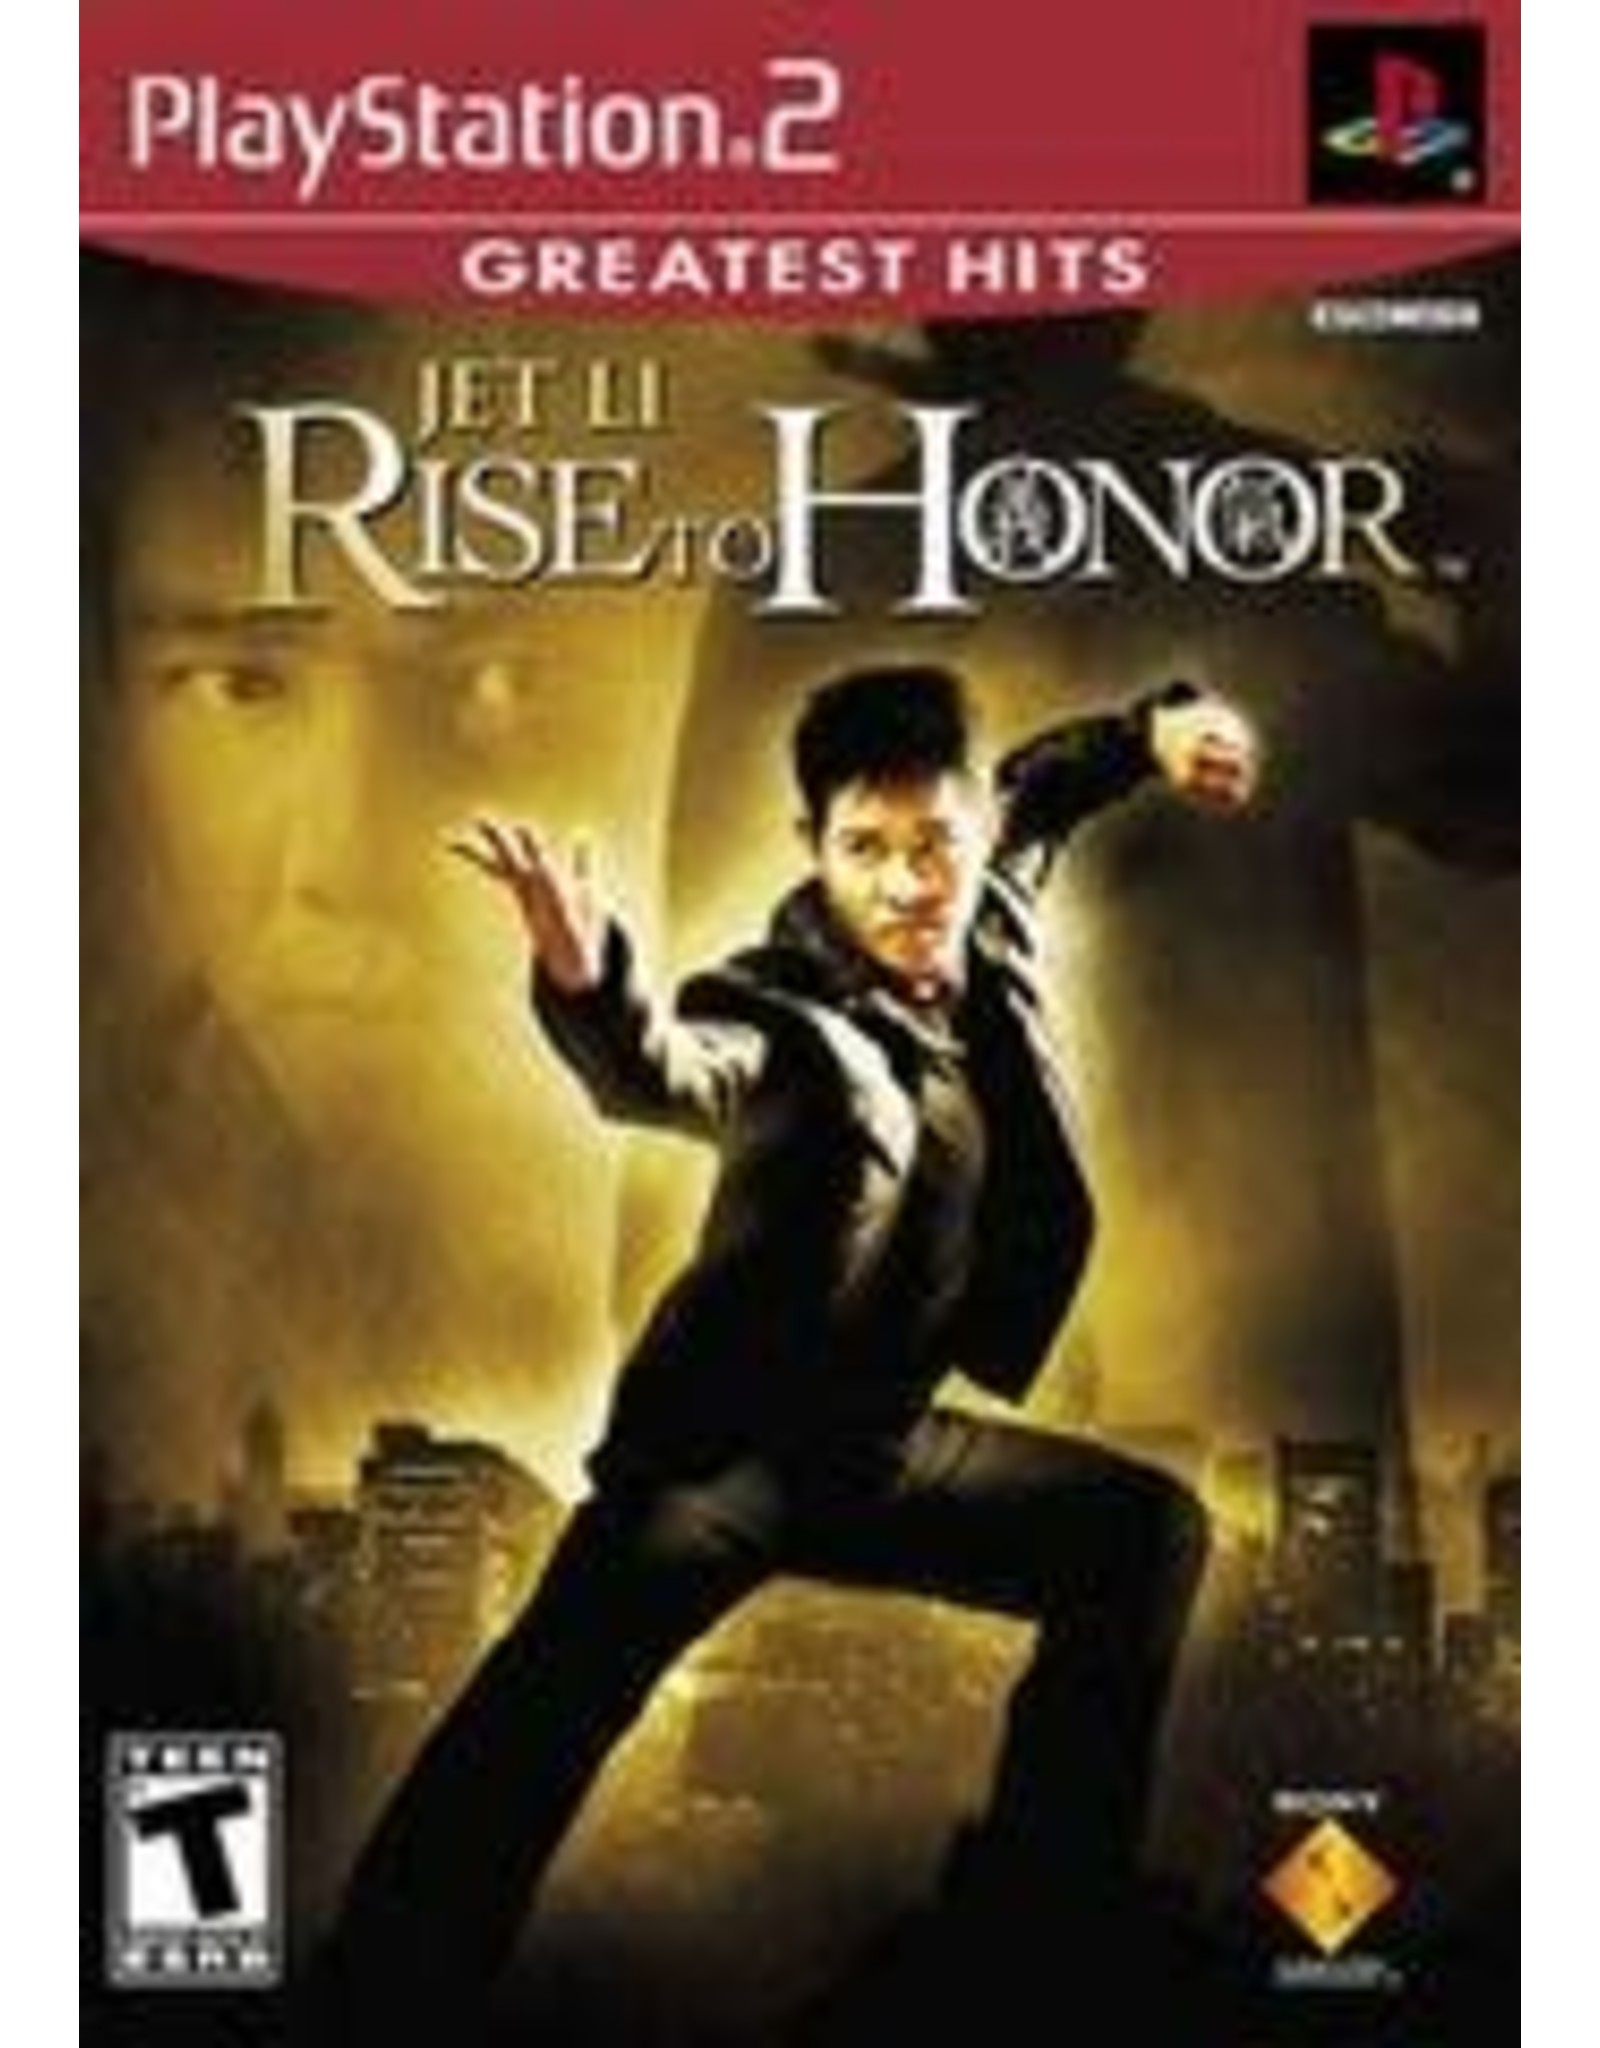 Playstation 2 Rise to Honor (Greatest Hits, CiB)